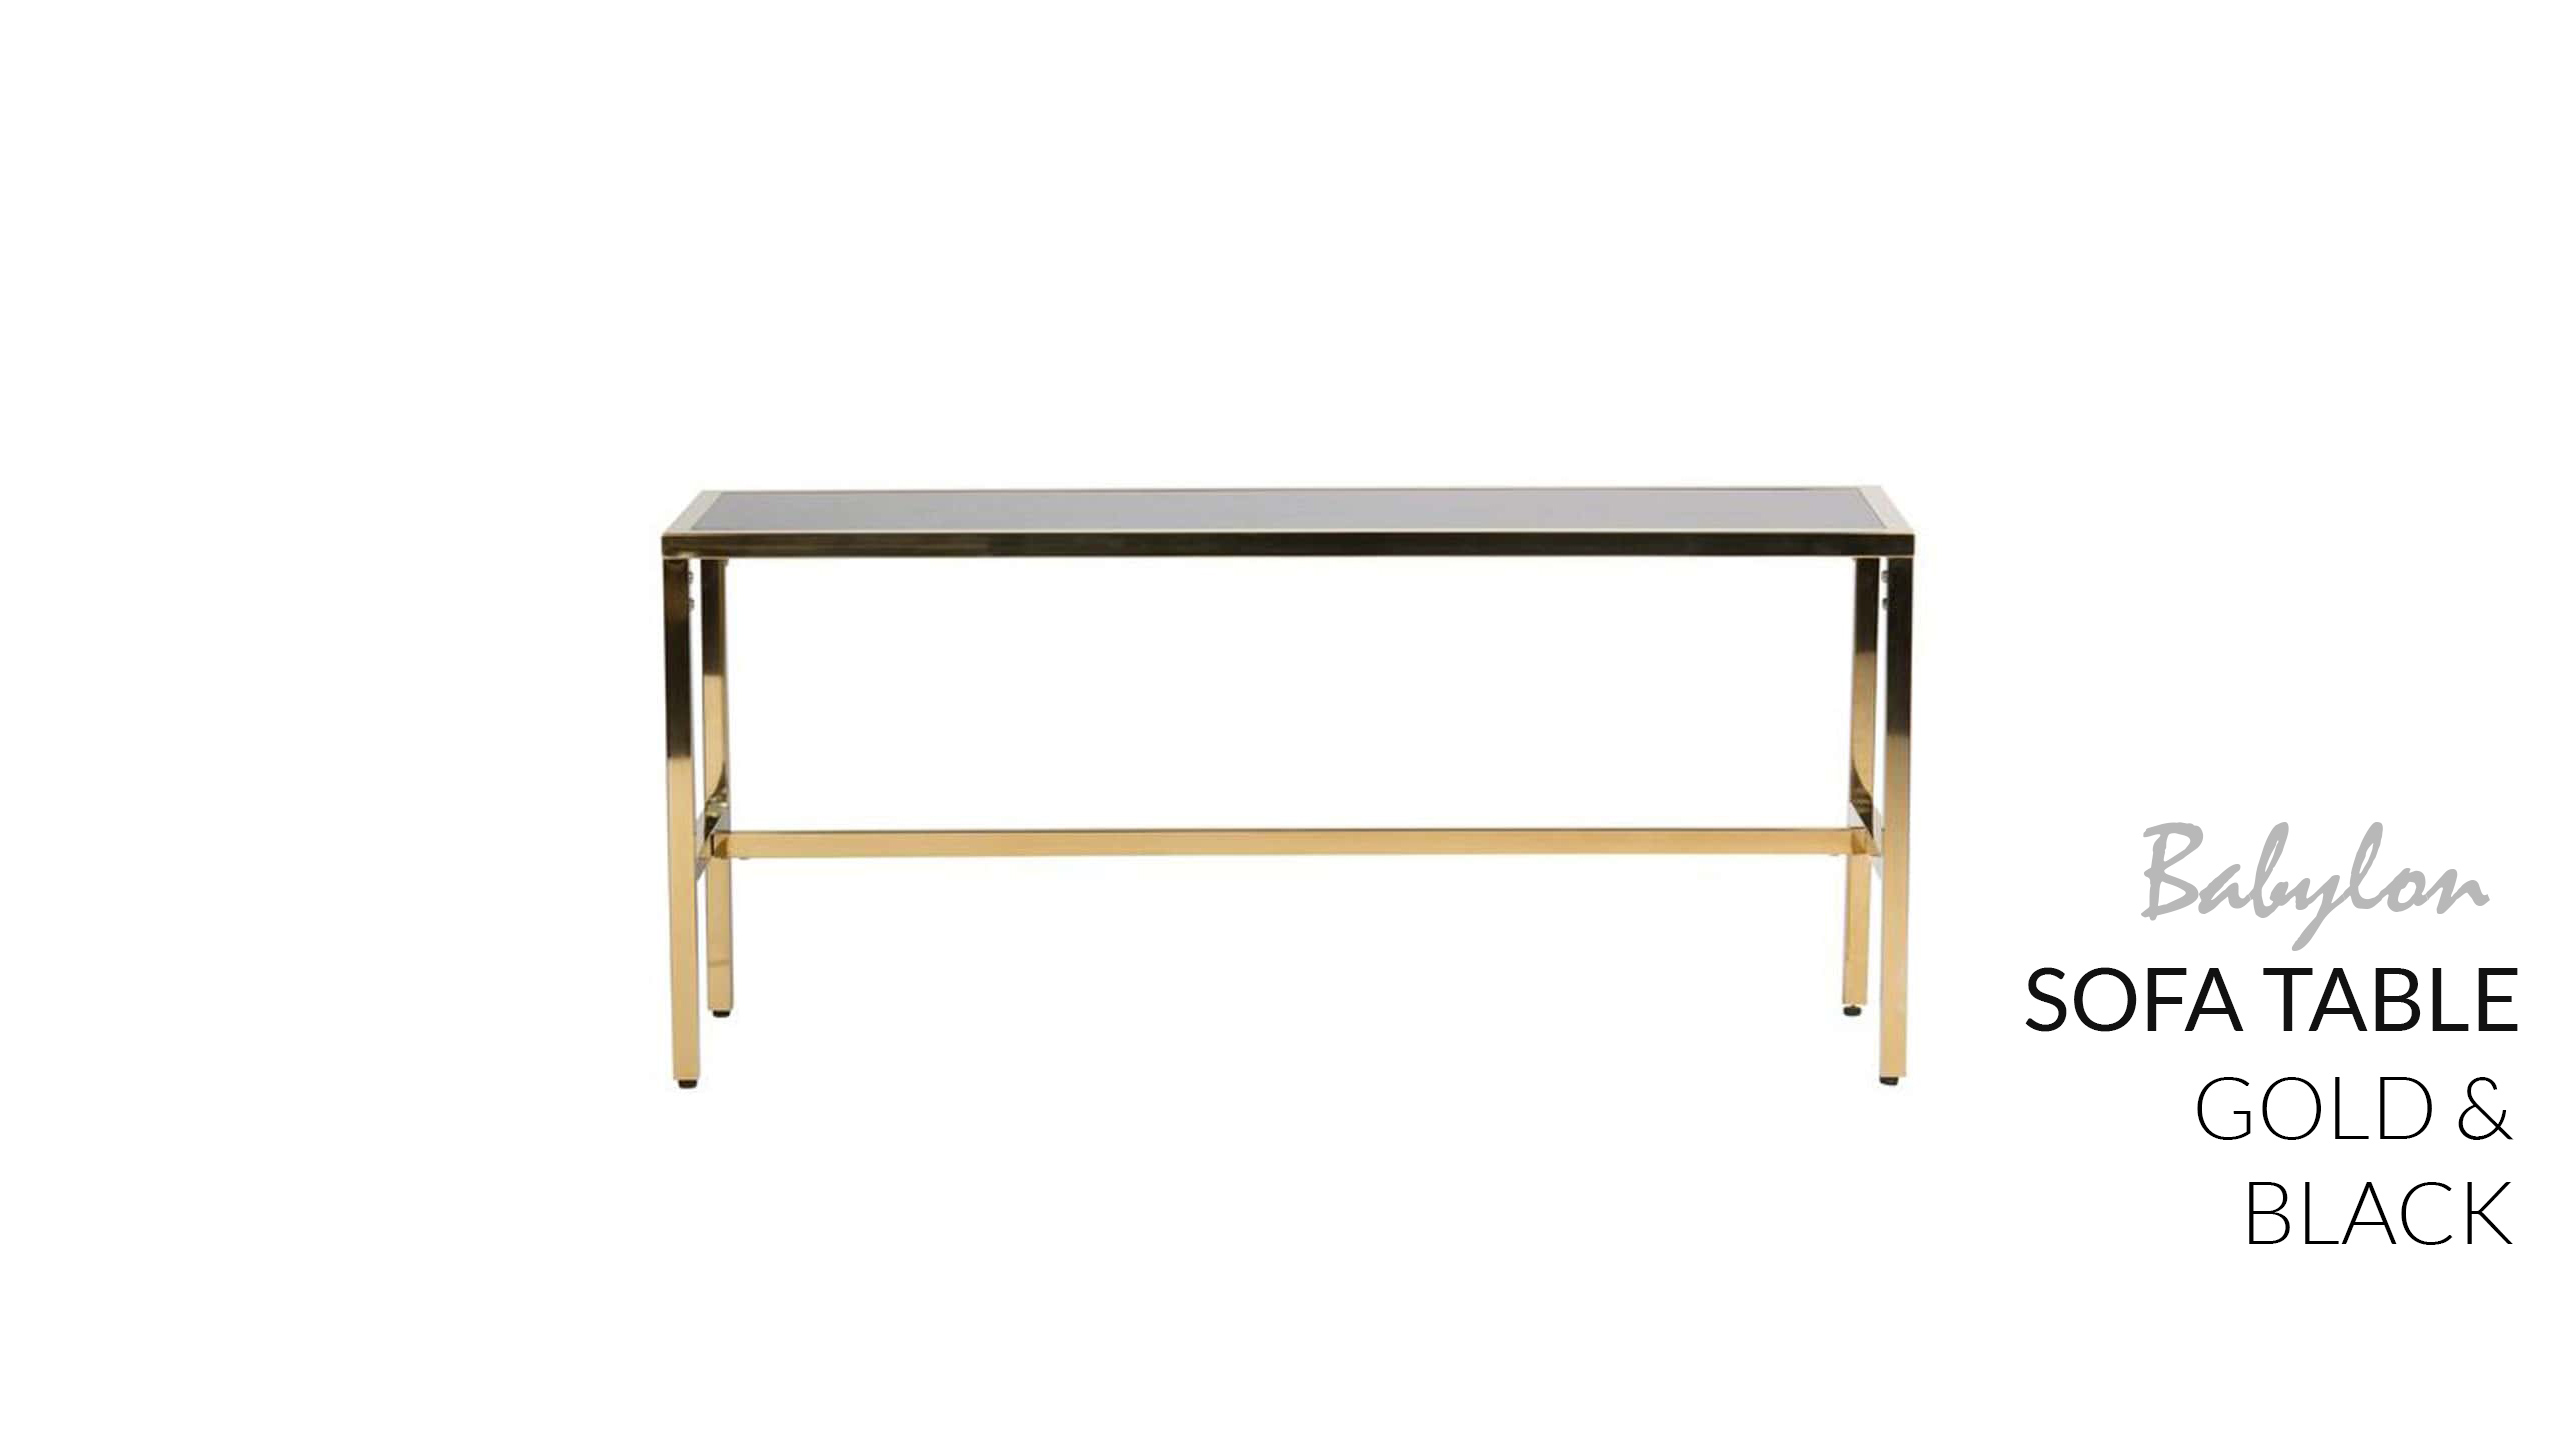 babylon decor accent table collection toronto wedding couchtable goldframe blackplexi front min tables floor tom legs outdoor metal round and chairs teak chaise lounge glass